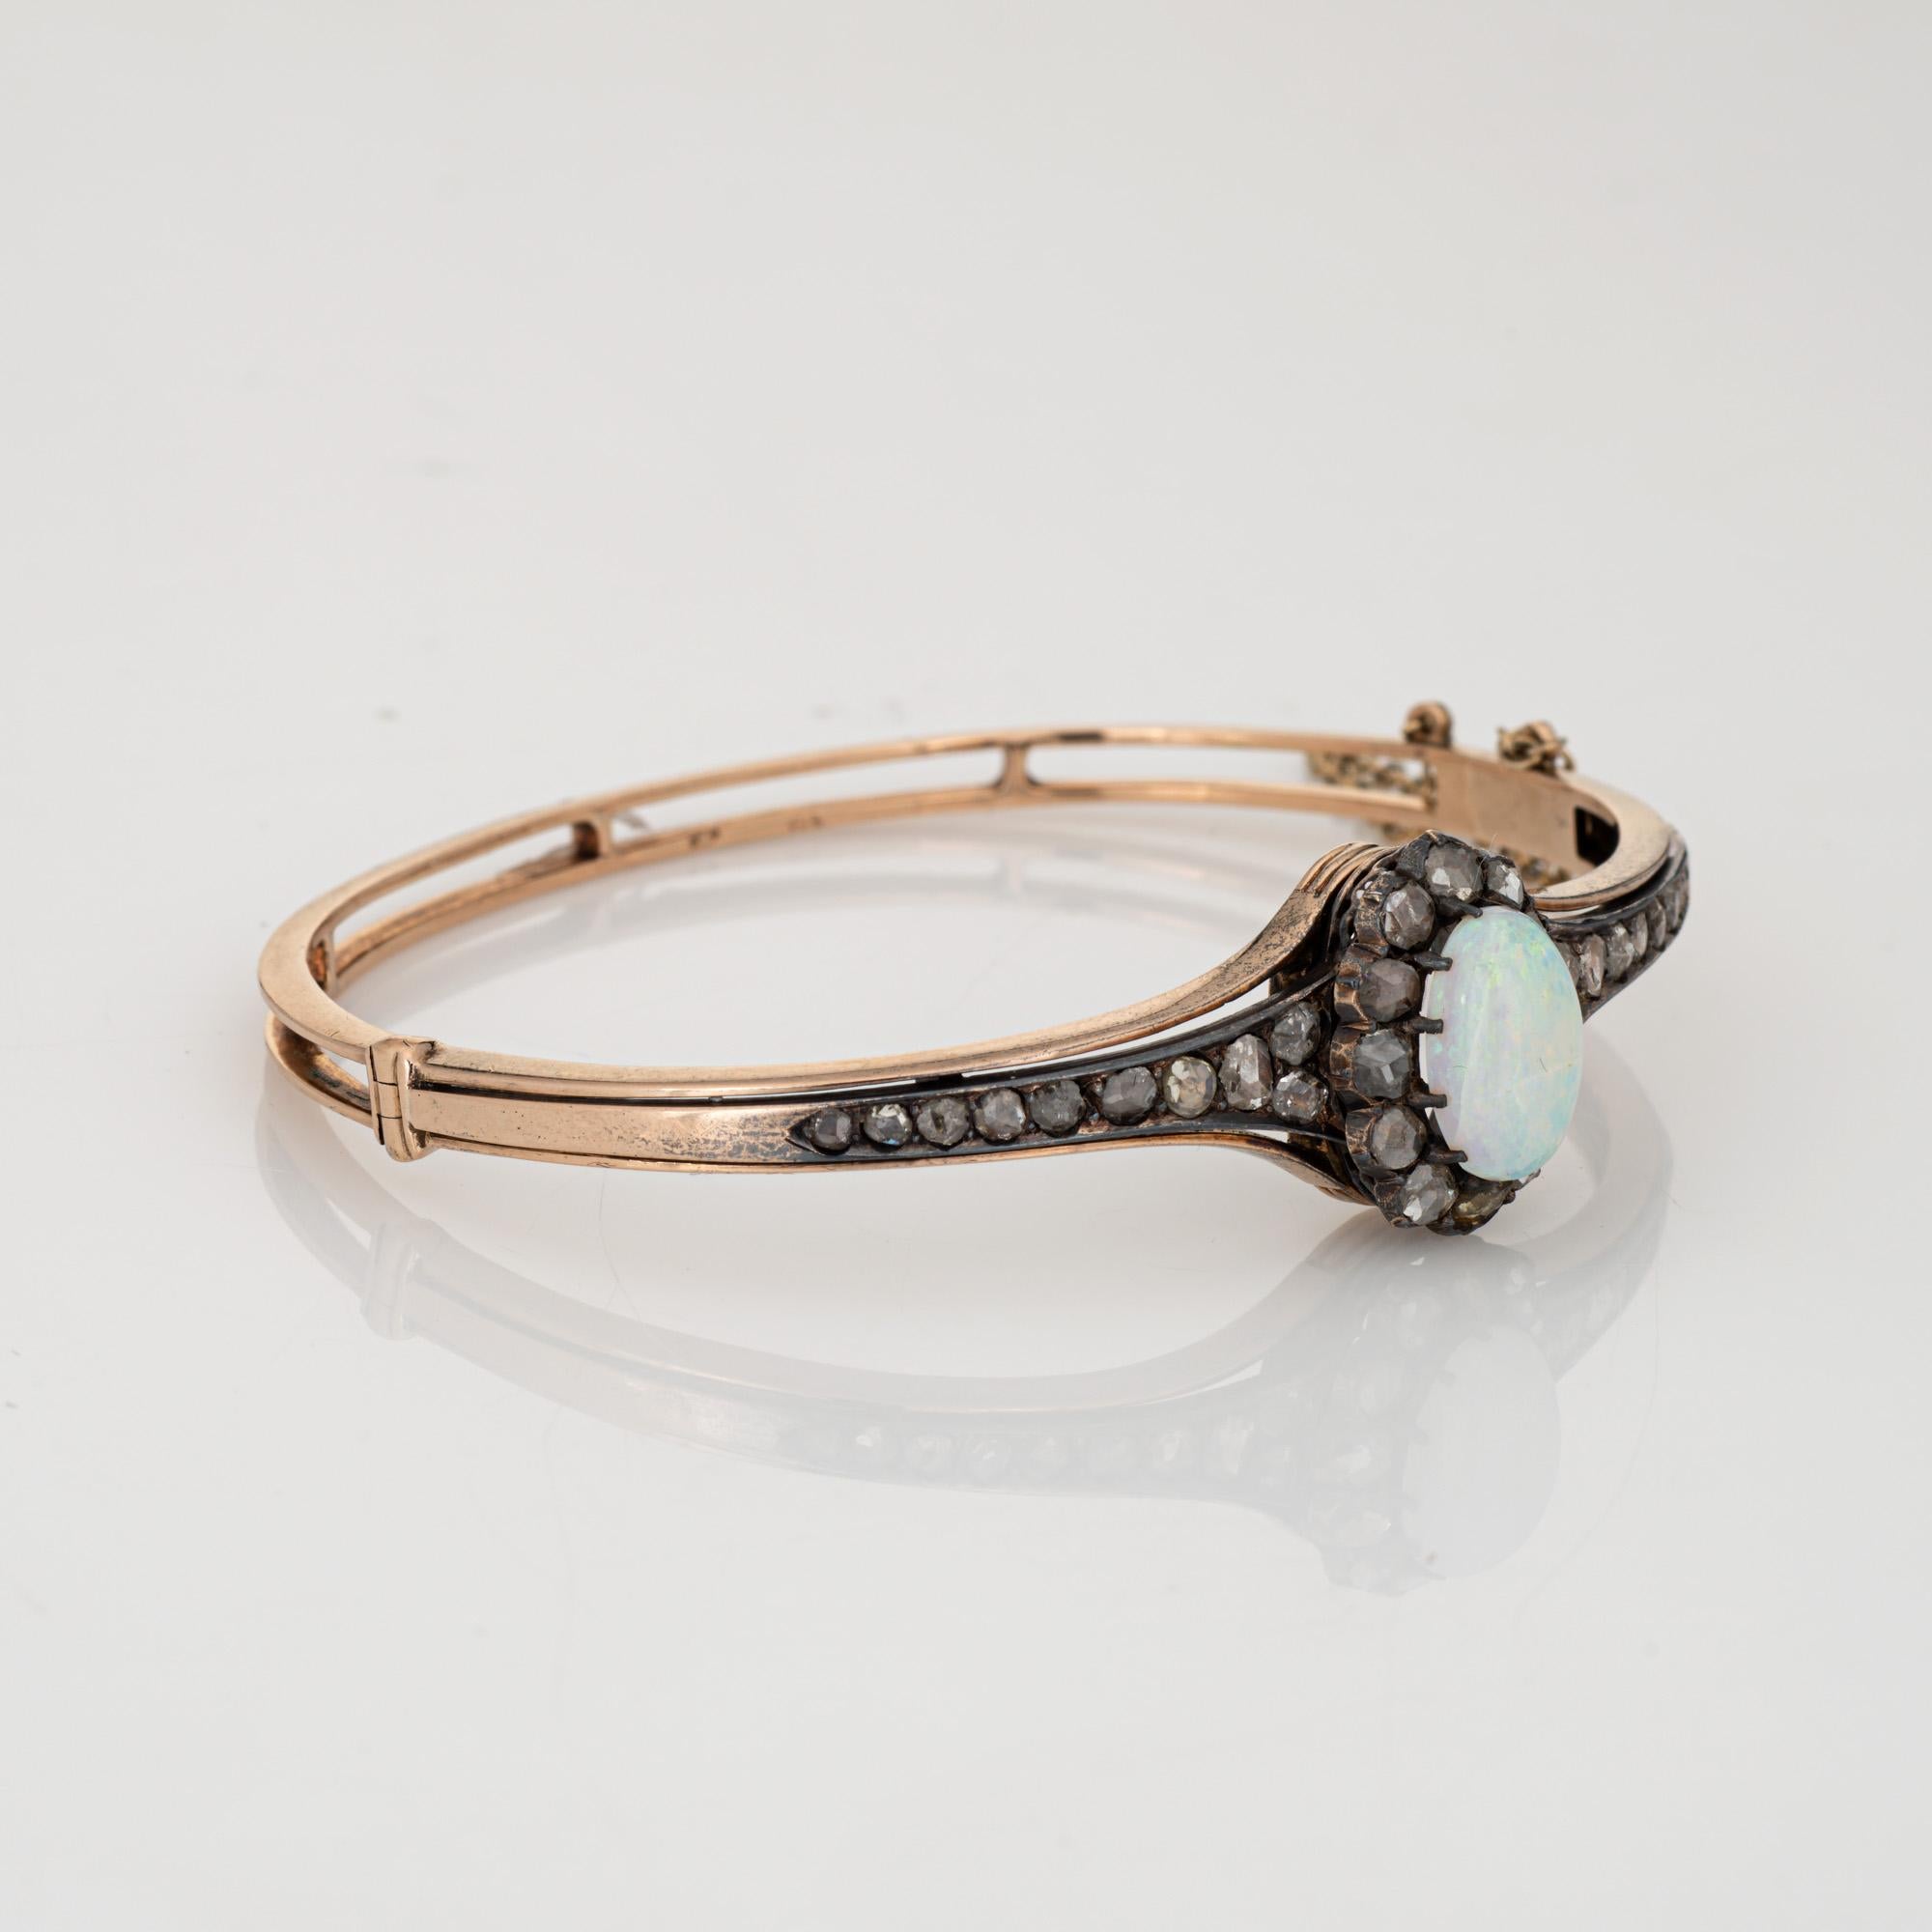 Finely detailed antique Victorian opal & diamond bangle bracelet (circa 1880s to 1900s), crafted in 14k yellow gold and silver. 

Cabochon cut opal measures 11.5mm x 7mm. 32 old rose cut diamonds measure (average) approx. 2mm.
The medium dome